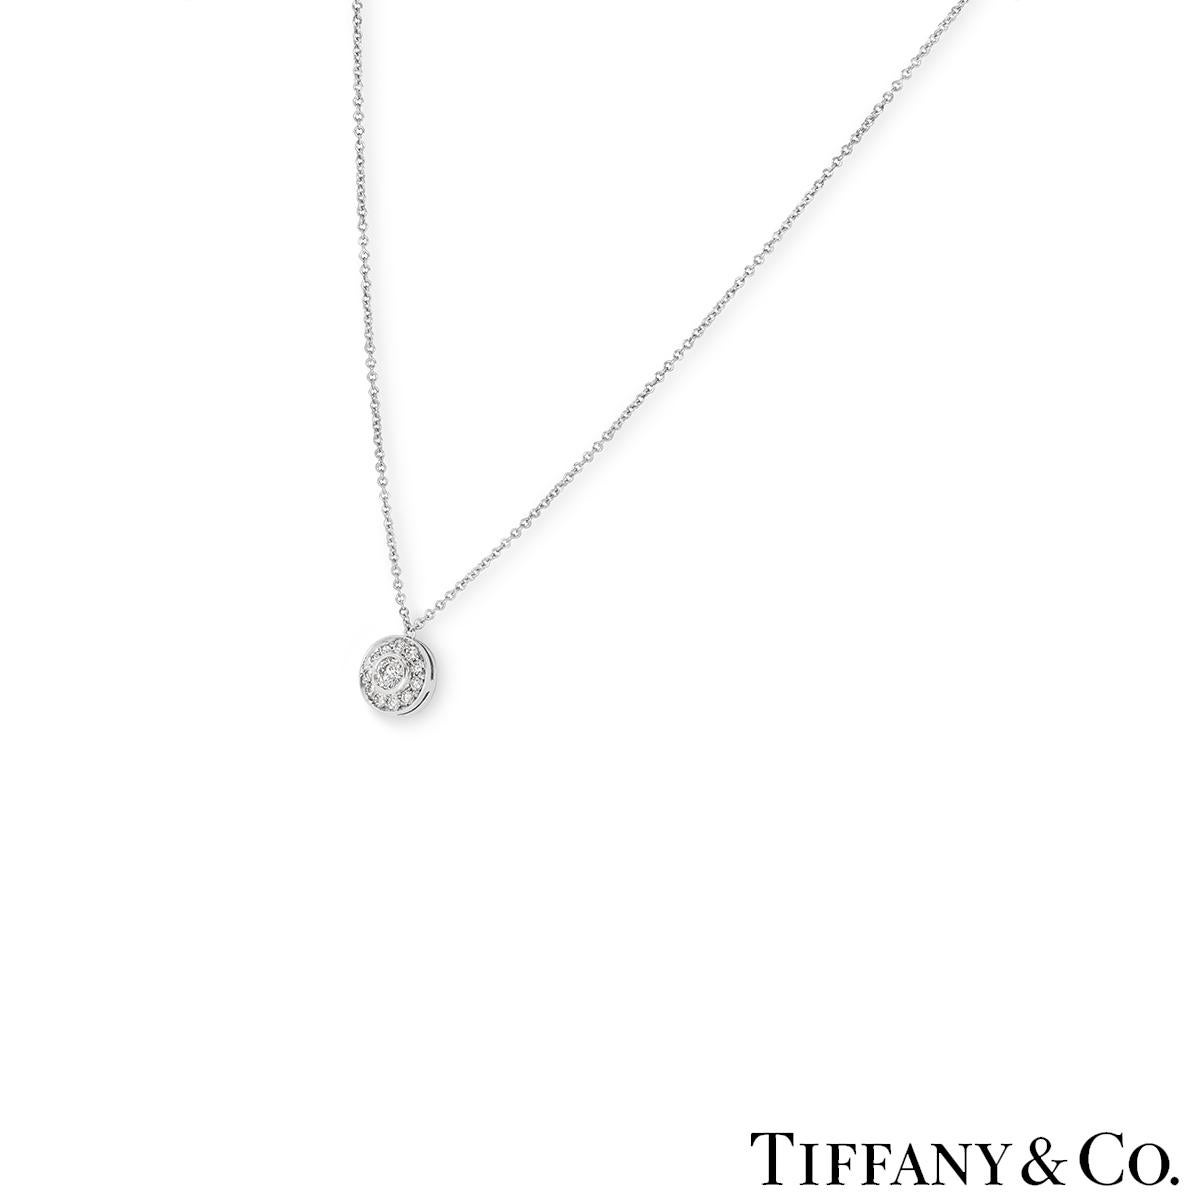 A charming platinum diamond pendant by Tiffany & Co from the Circlet collection. The pendant is bezel set to the centre with a round brilliant cut diamond weighing approximately 0.15ct, F colour and VS clarity. Accentuating the centre diamond is a